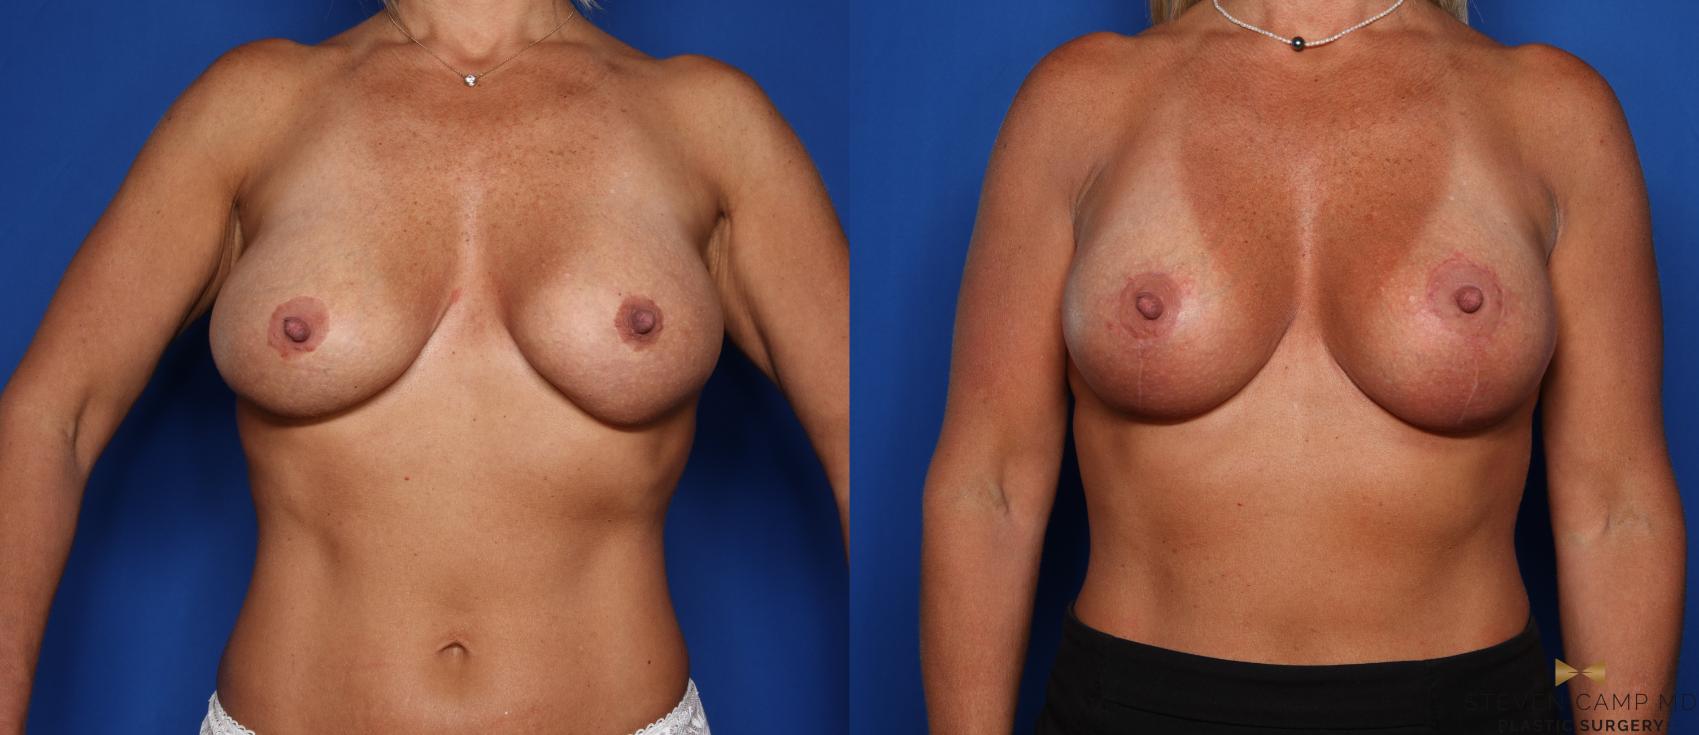 Breast Augmentation Revision Before & After Photo | Fort Worth, Texas | Steven Camp MD Plastic Surgery